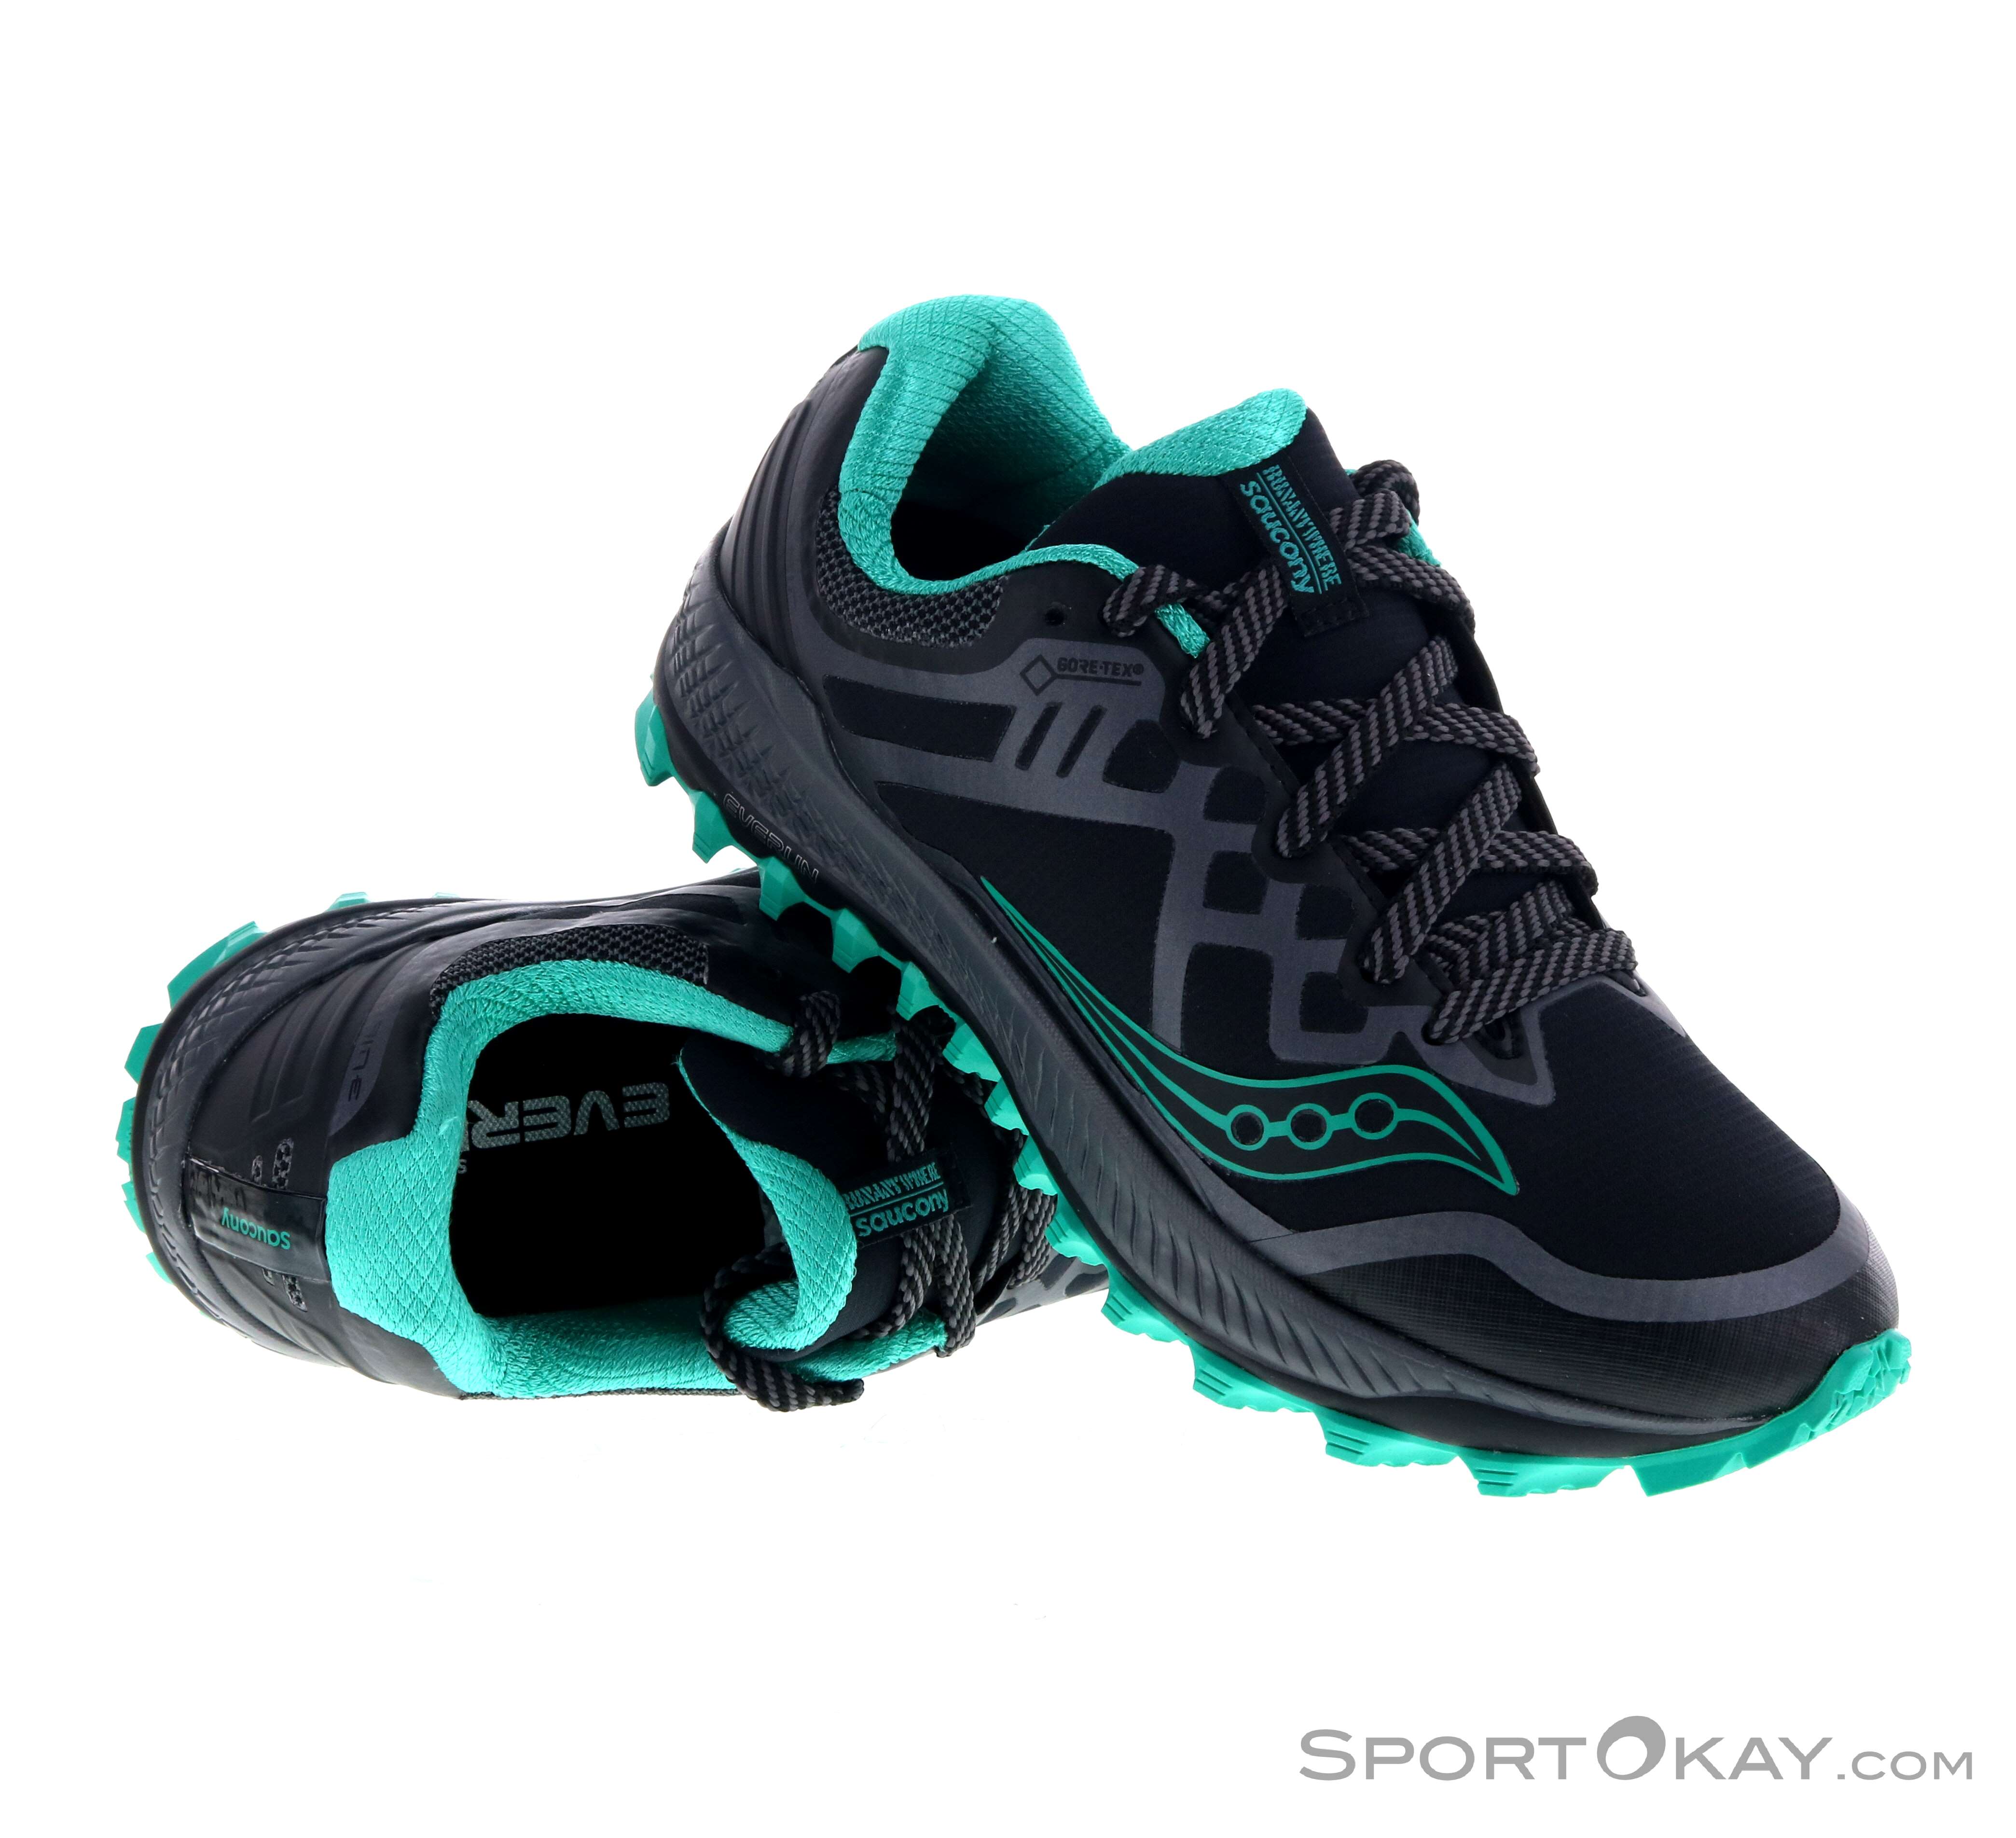 saucony peregrine trail shoes